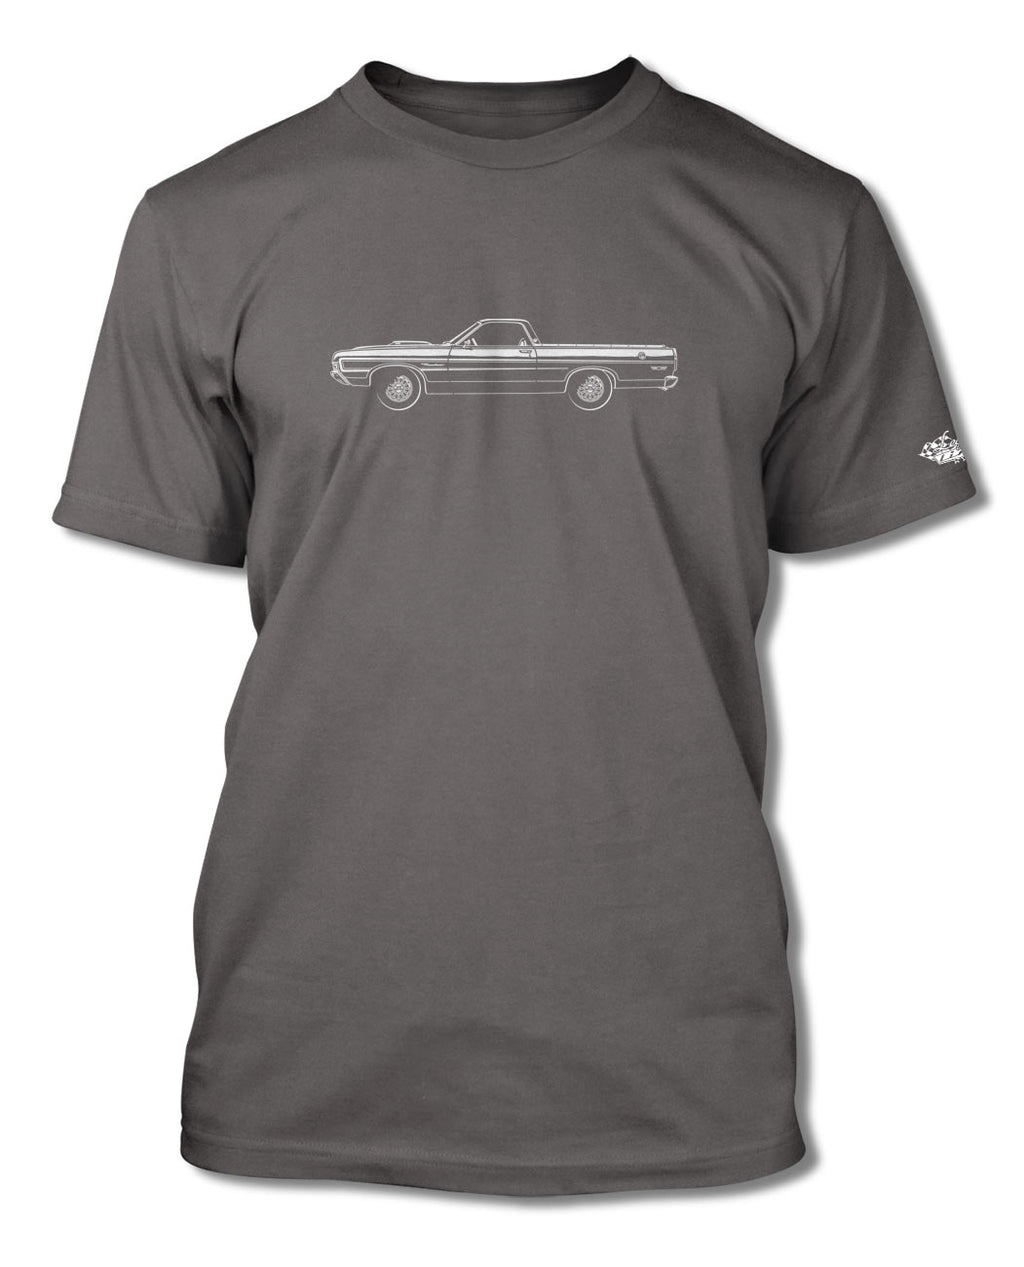 1969 Ford Ranchero GT with Stripes T-Shirt - Men - Side View